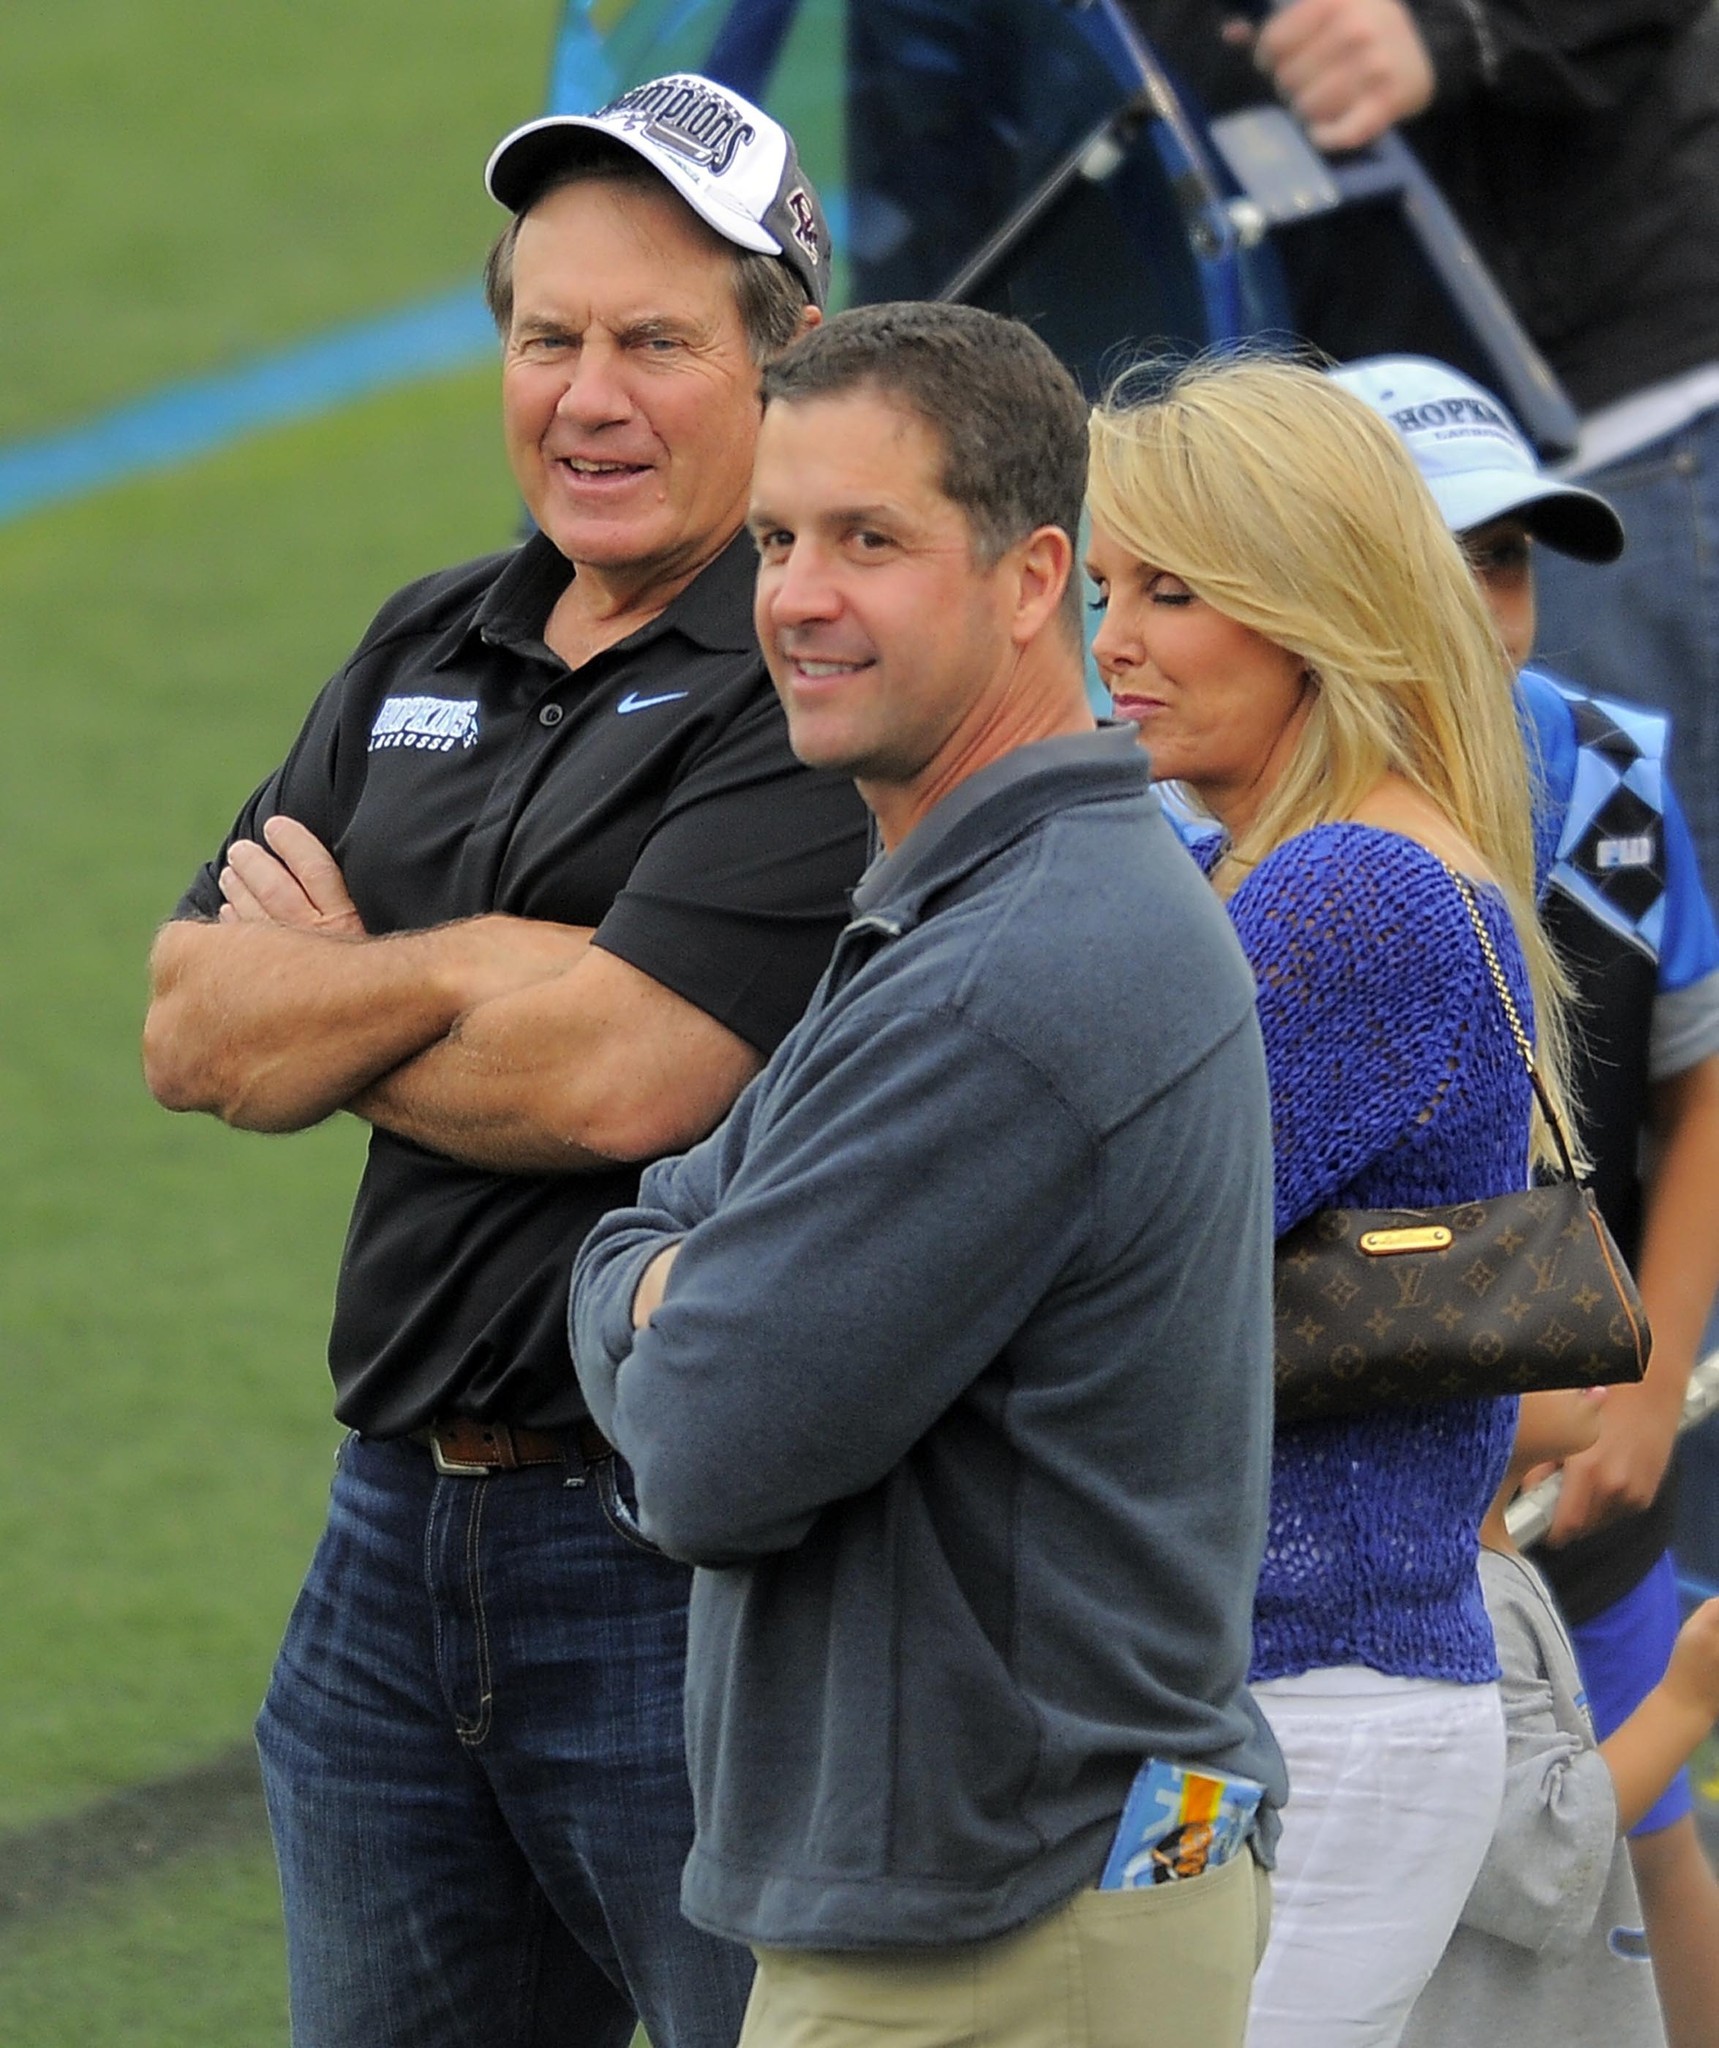 Baltimore Ravens head coach John Harbaugh (front) chats with New England Patriots head coach Bill Belichick and Linda Holliday at the Maryland-Johns Hopkins game.